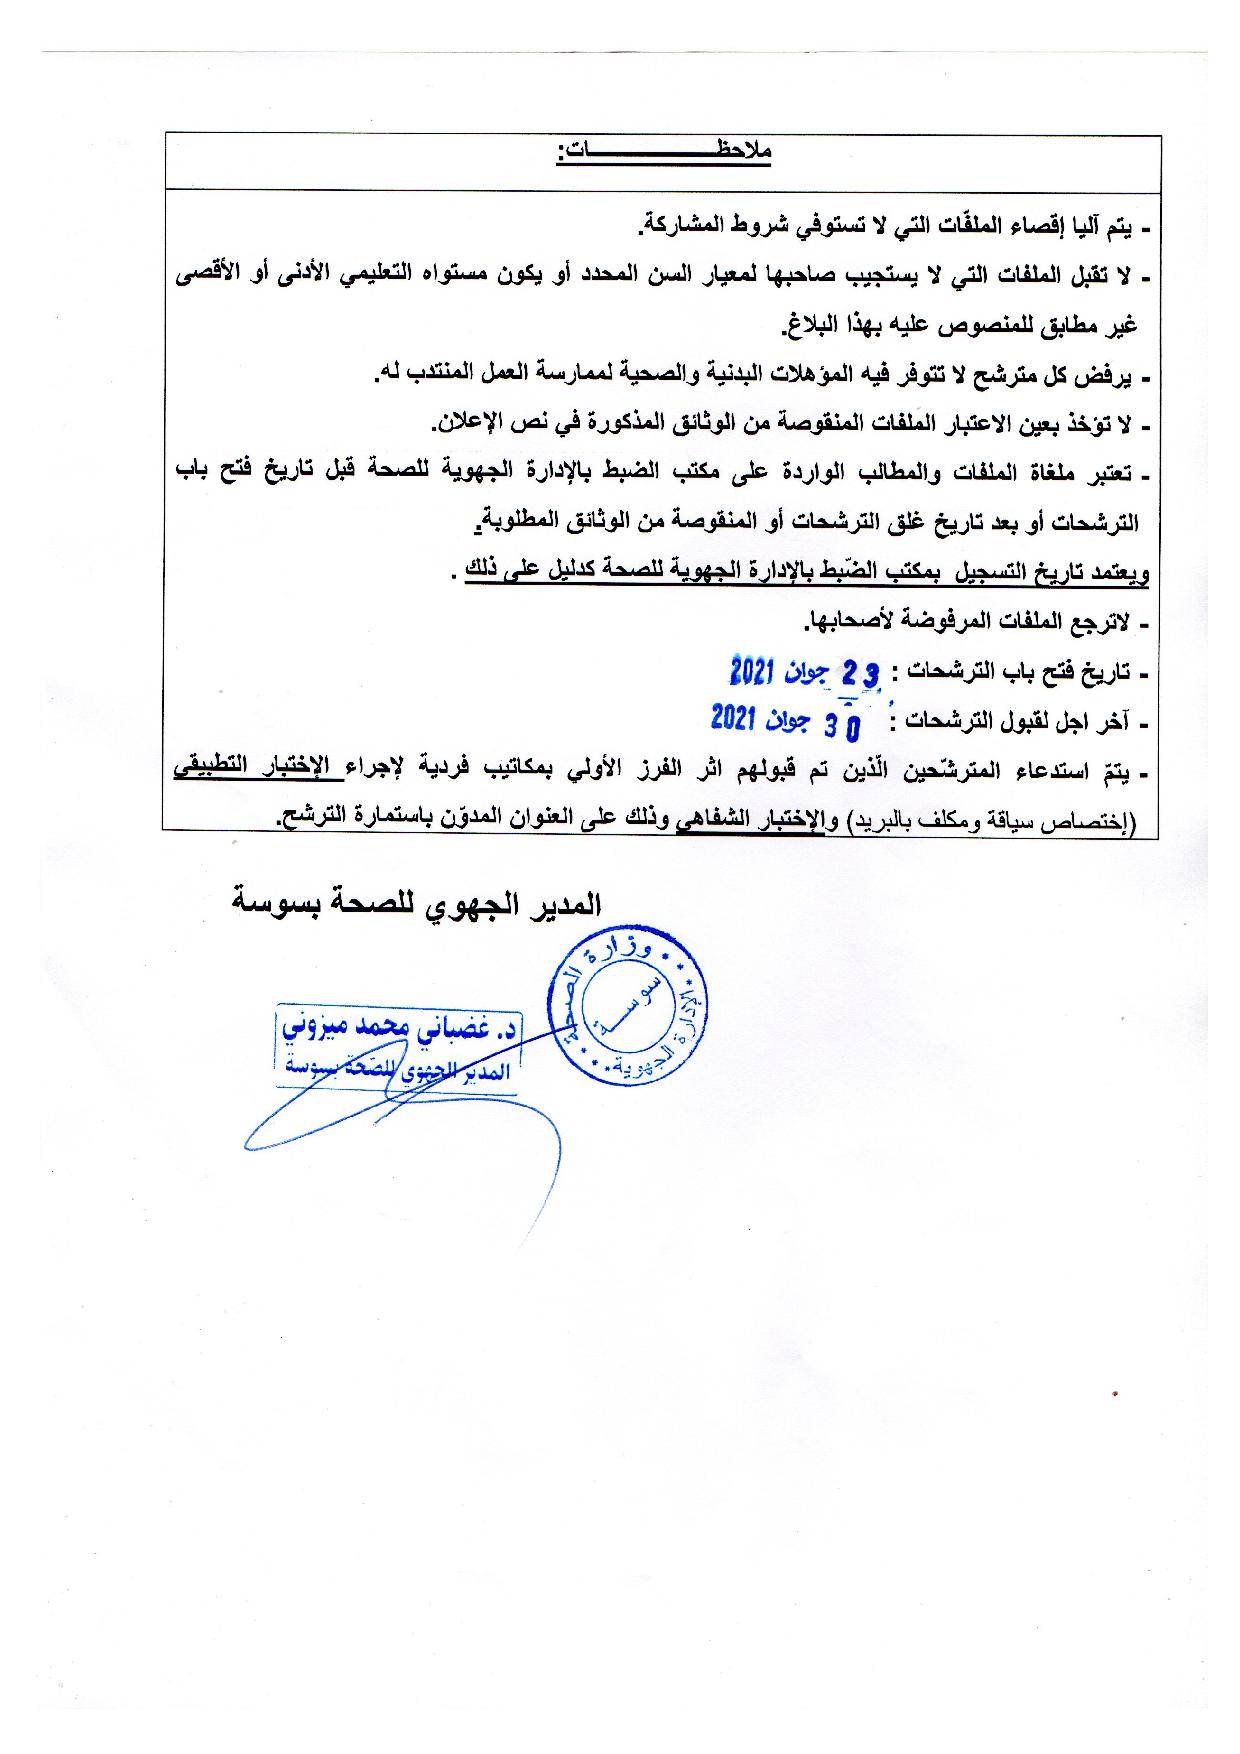 Concours_sousse_2021-page-004.jpg